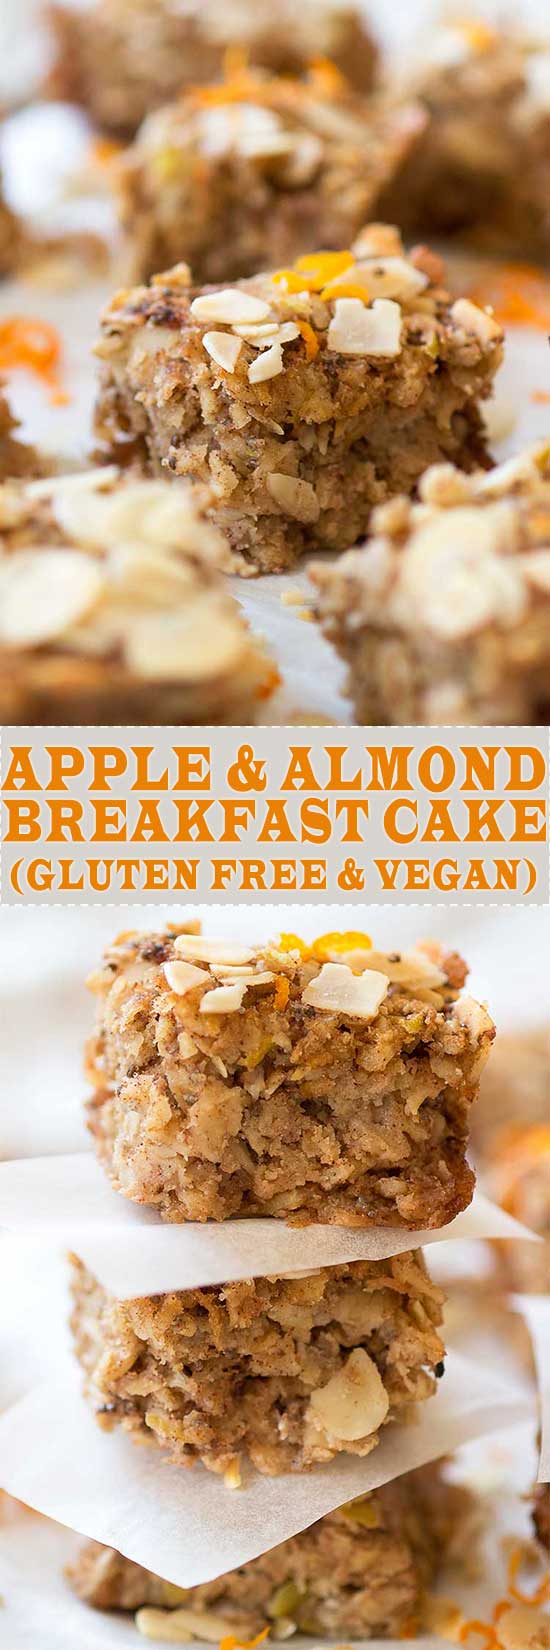 Almond & Apple Breakfast Cake! Who doesn't love having cake for breakfast, especially if it's gluten free and vegan!